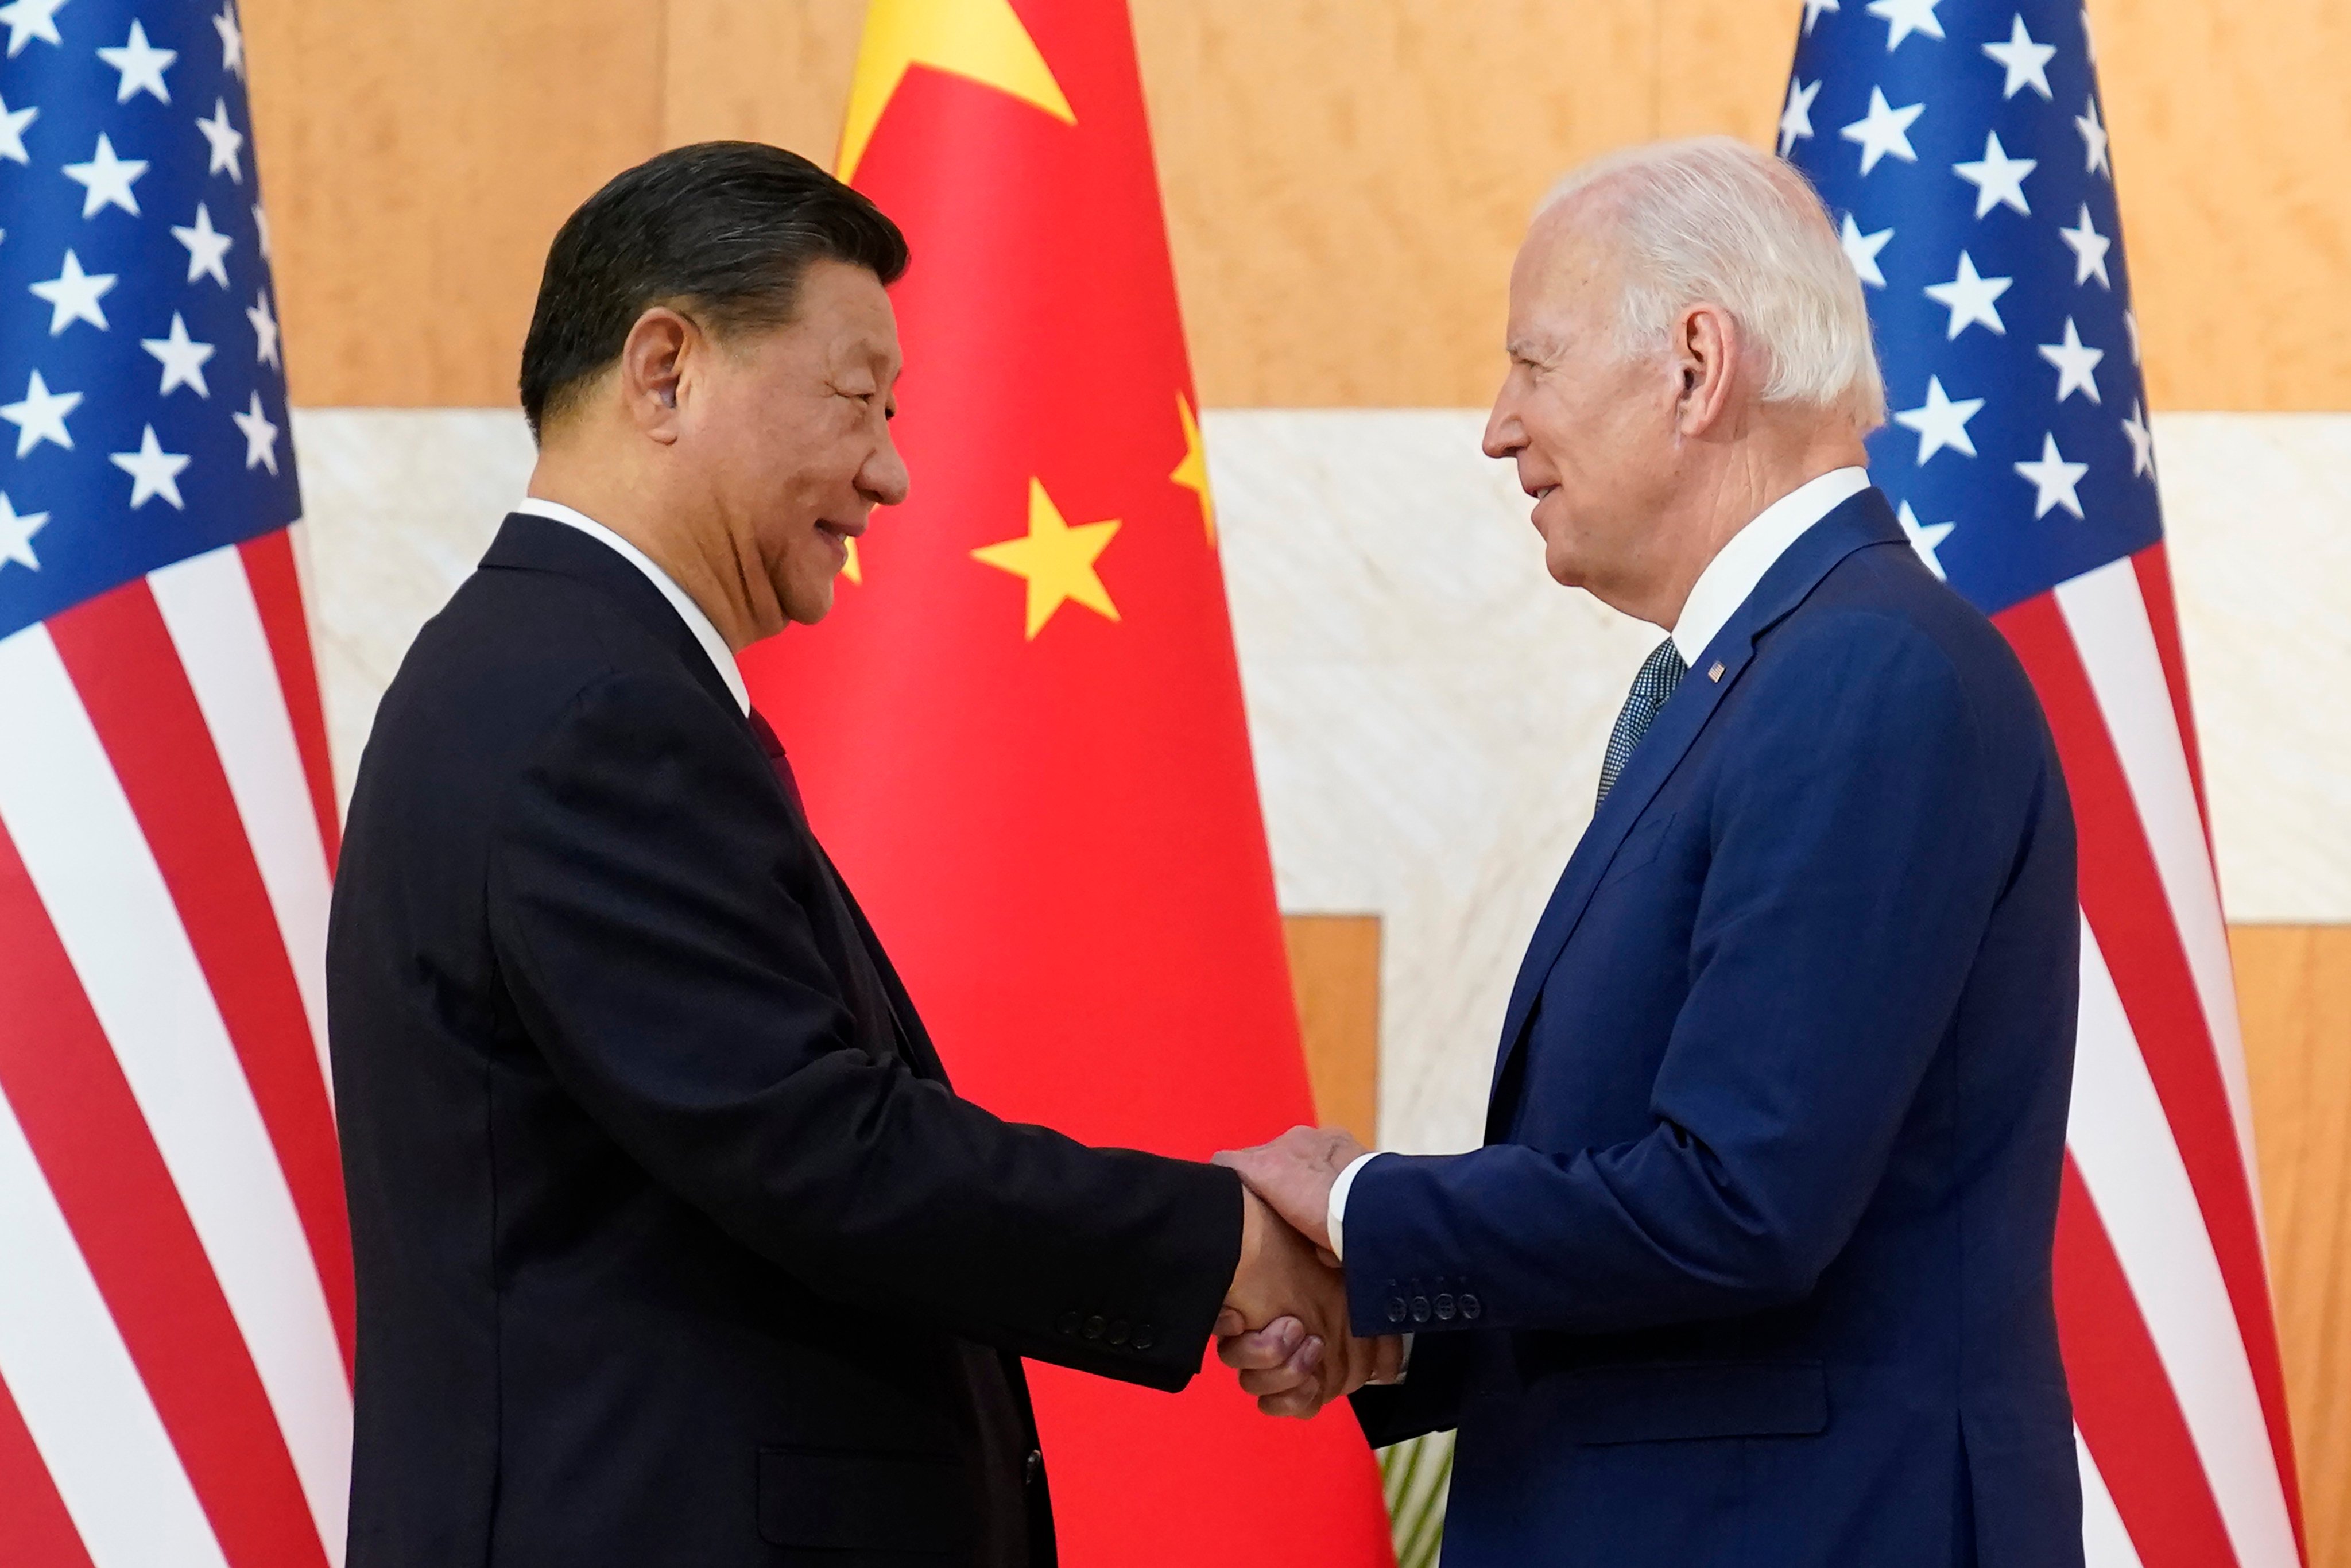 Chinese President Xi Jinping and US President Joe Biden shake hands before their meeting on the sidelines of the G20 summit meeting on November 14 in Nusa Dua, Bali, Indonesia. Photo: AP